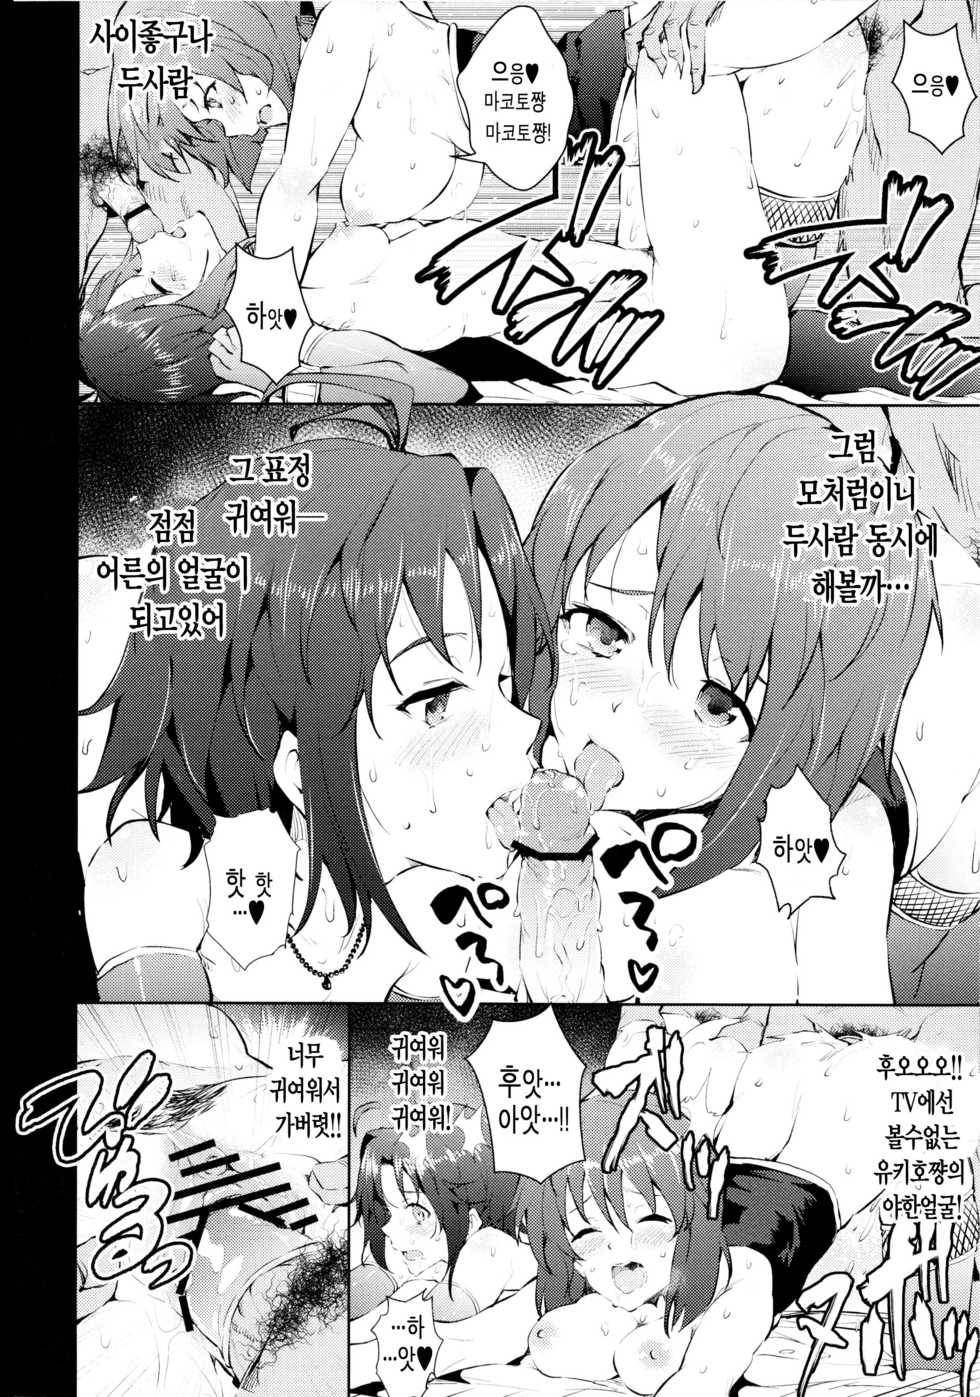 (C83) [Galley (ryoma)] OMKB (THE iDOLM@STER) [Korean] - Page 10